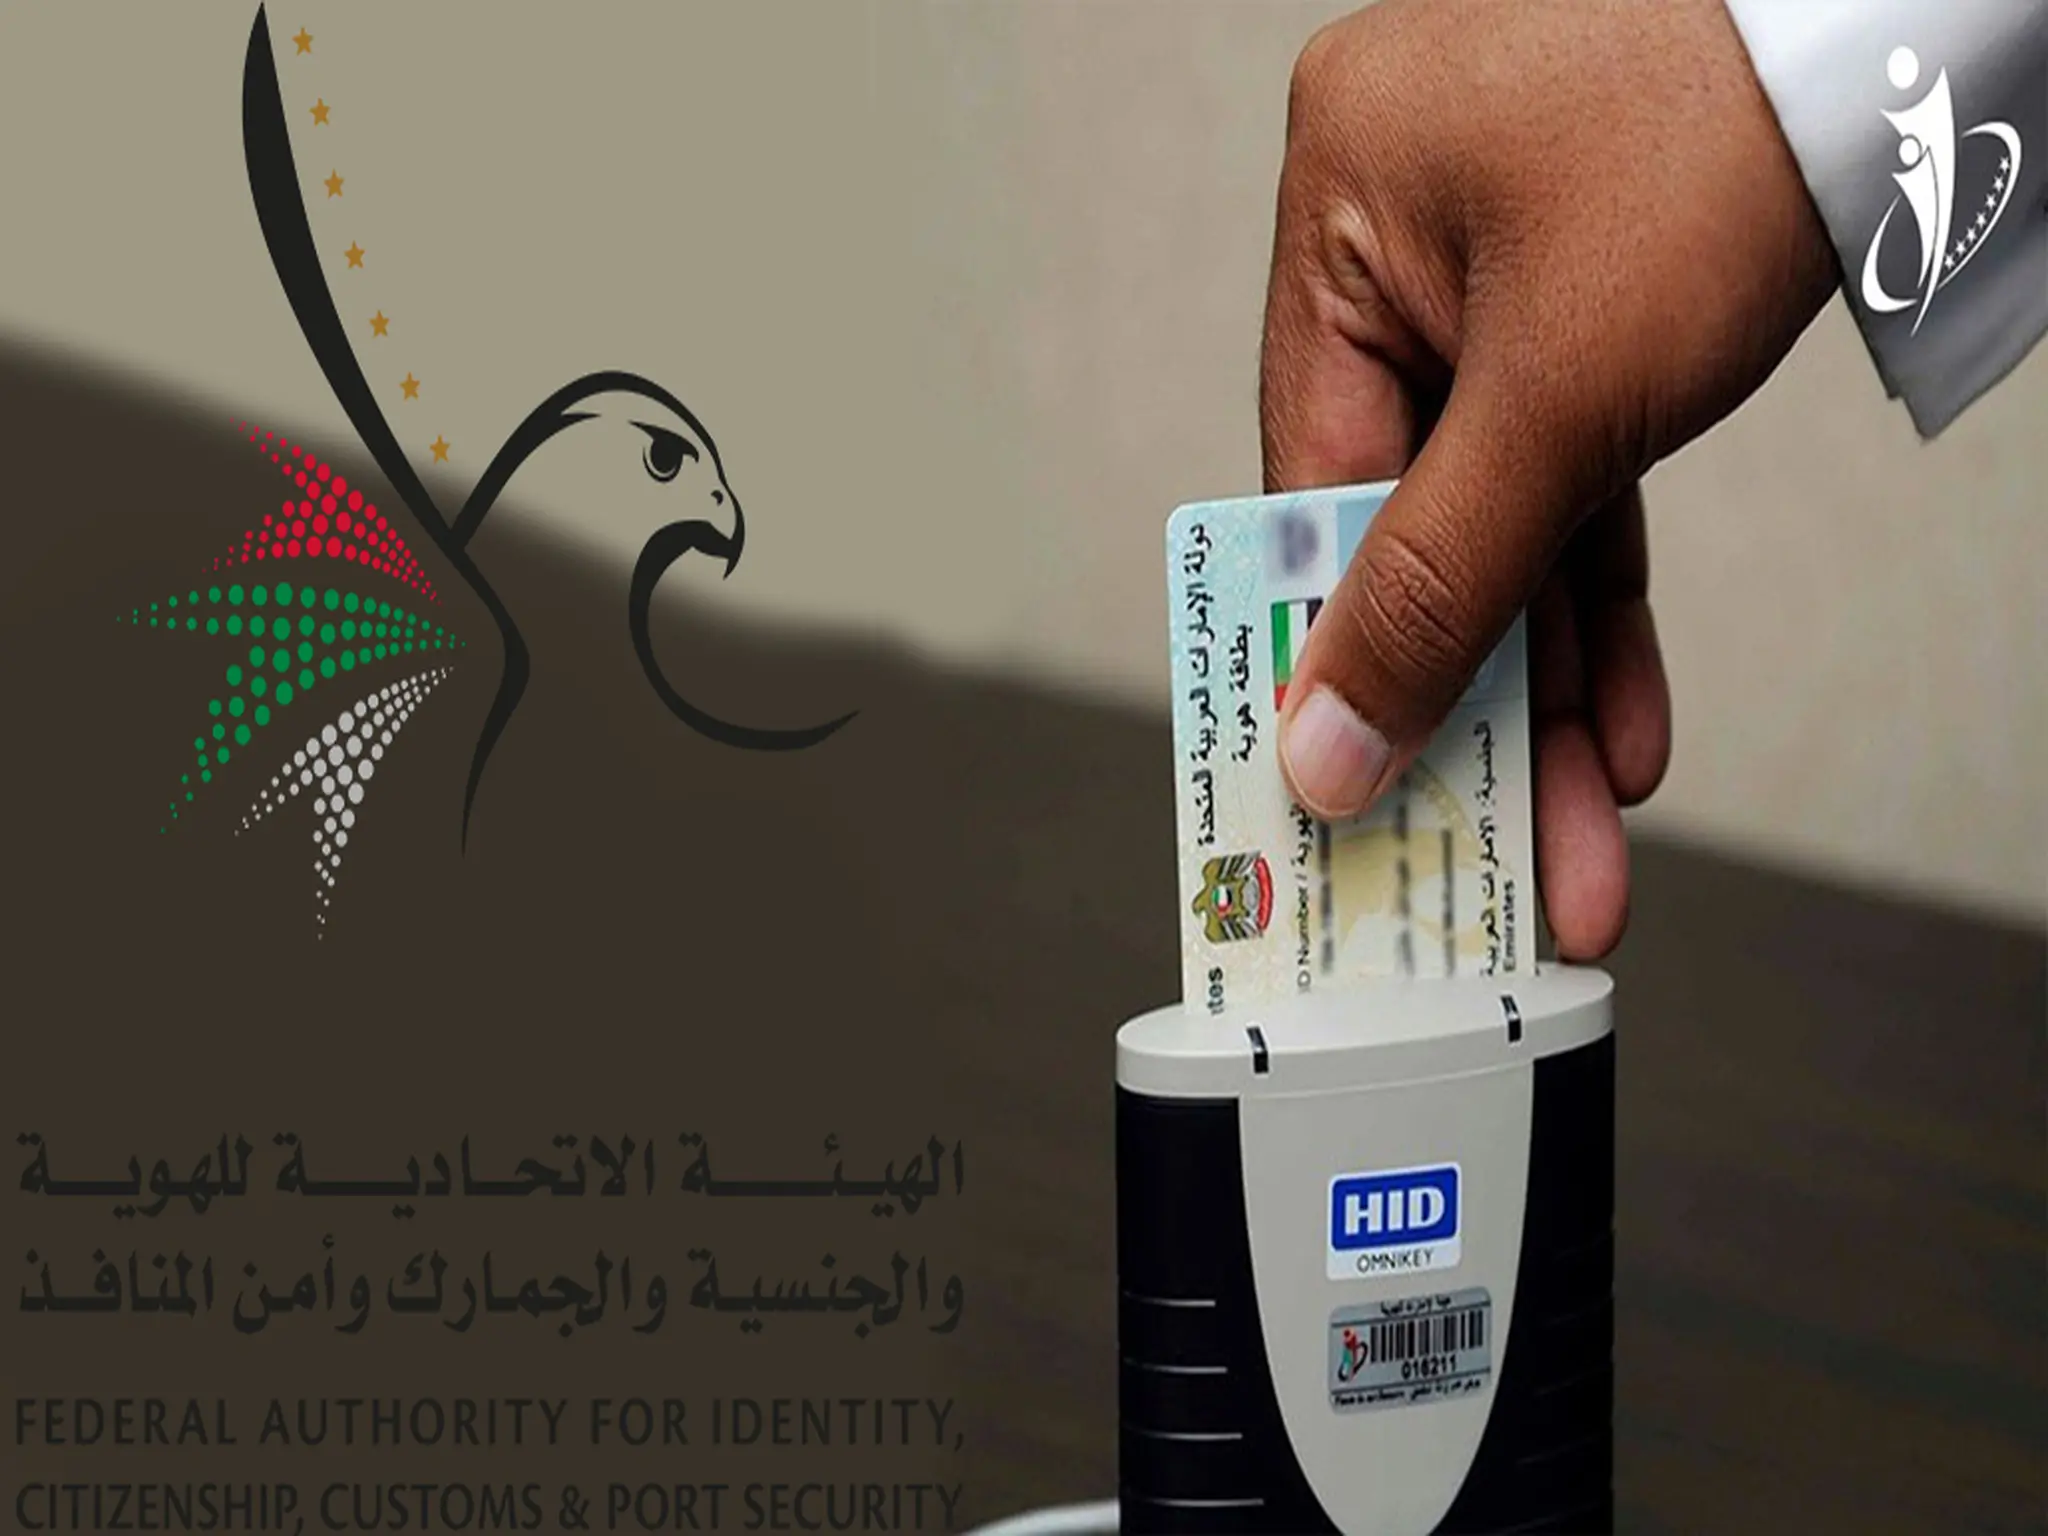 Urgent UAE: Conditions for obtaining, renewing or canceling an identity card